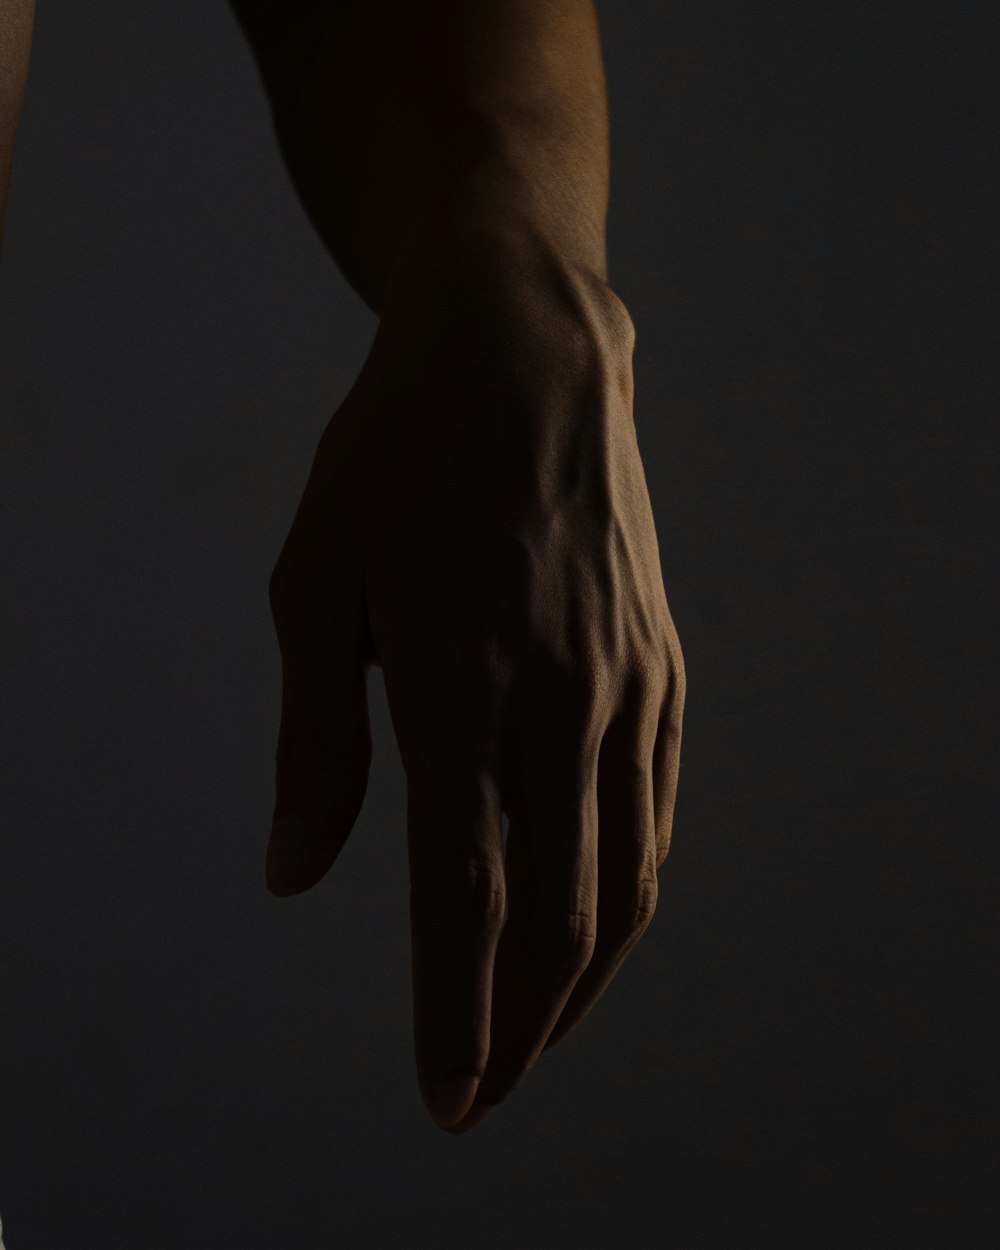 persons hand on black background